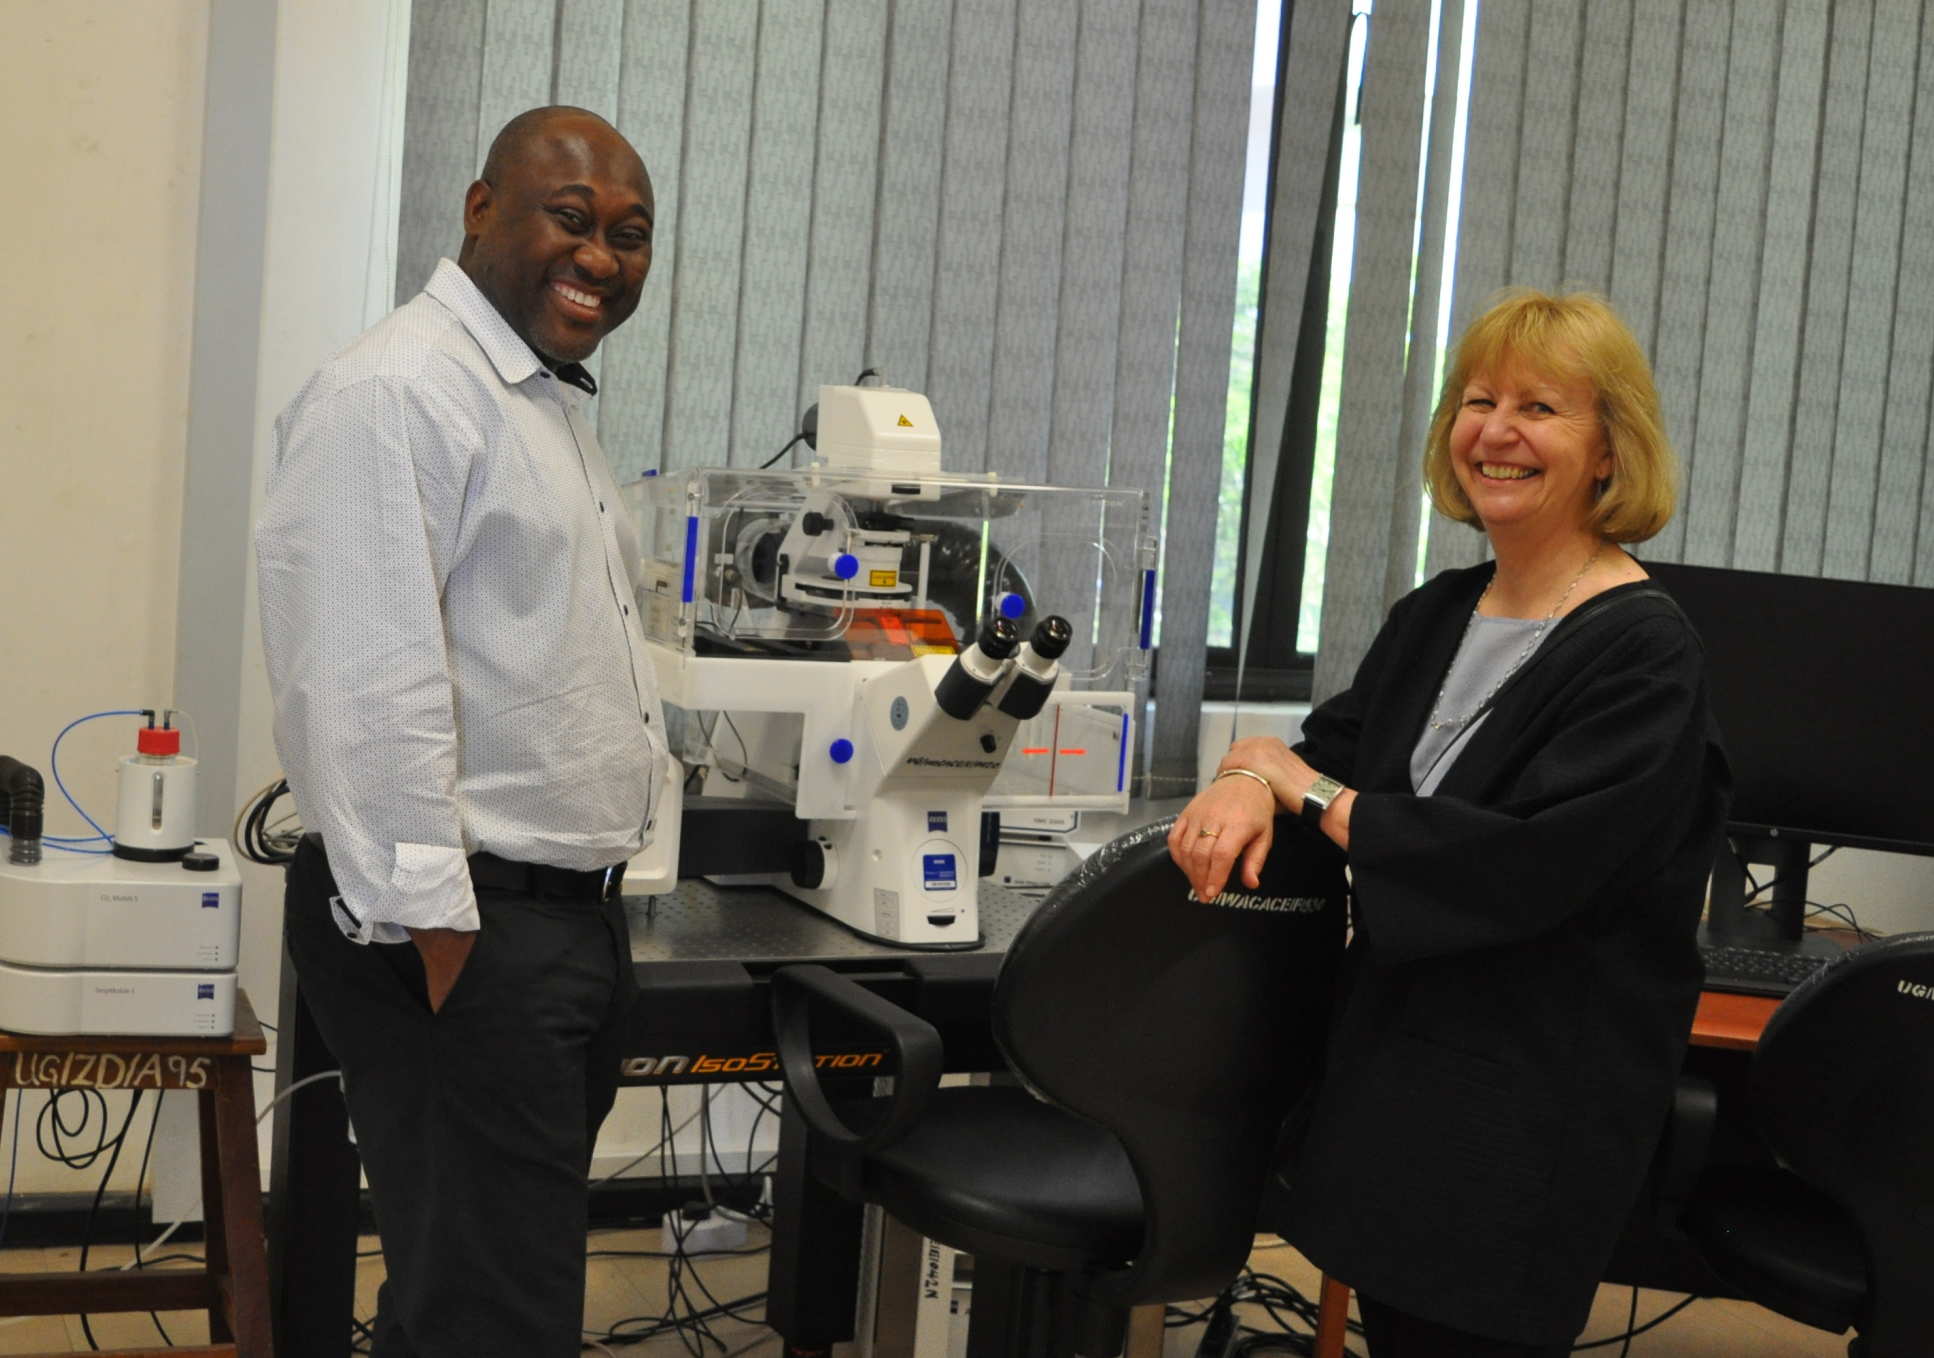 Professor Dallman discussed lab equipment with the Director of the West African Centre for Cell Biology of Infectious Pathogens at the University of Ghana